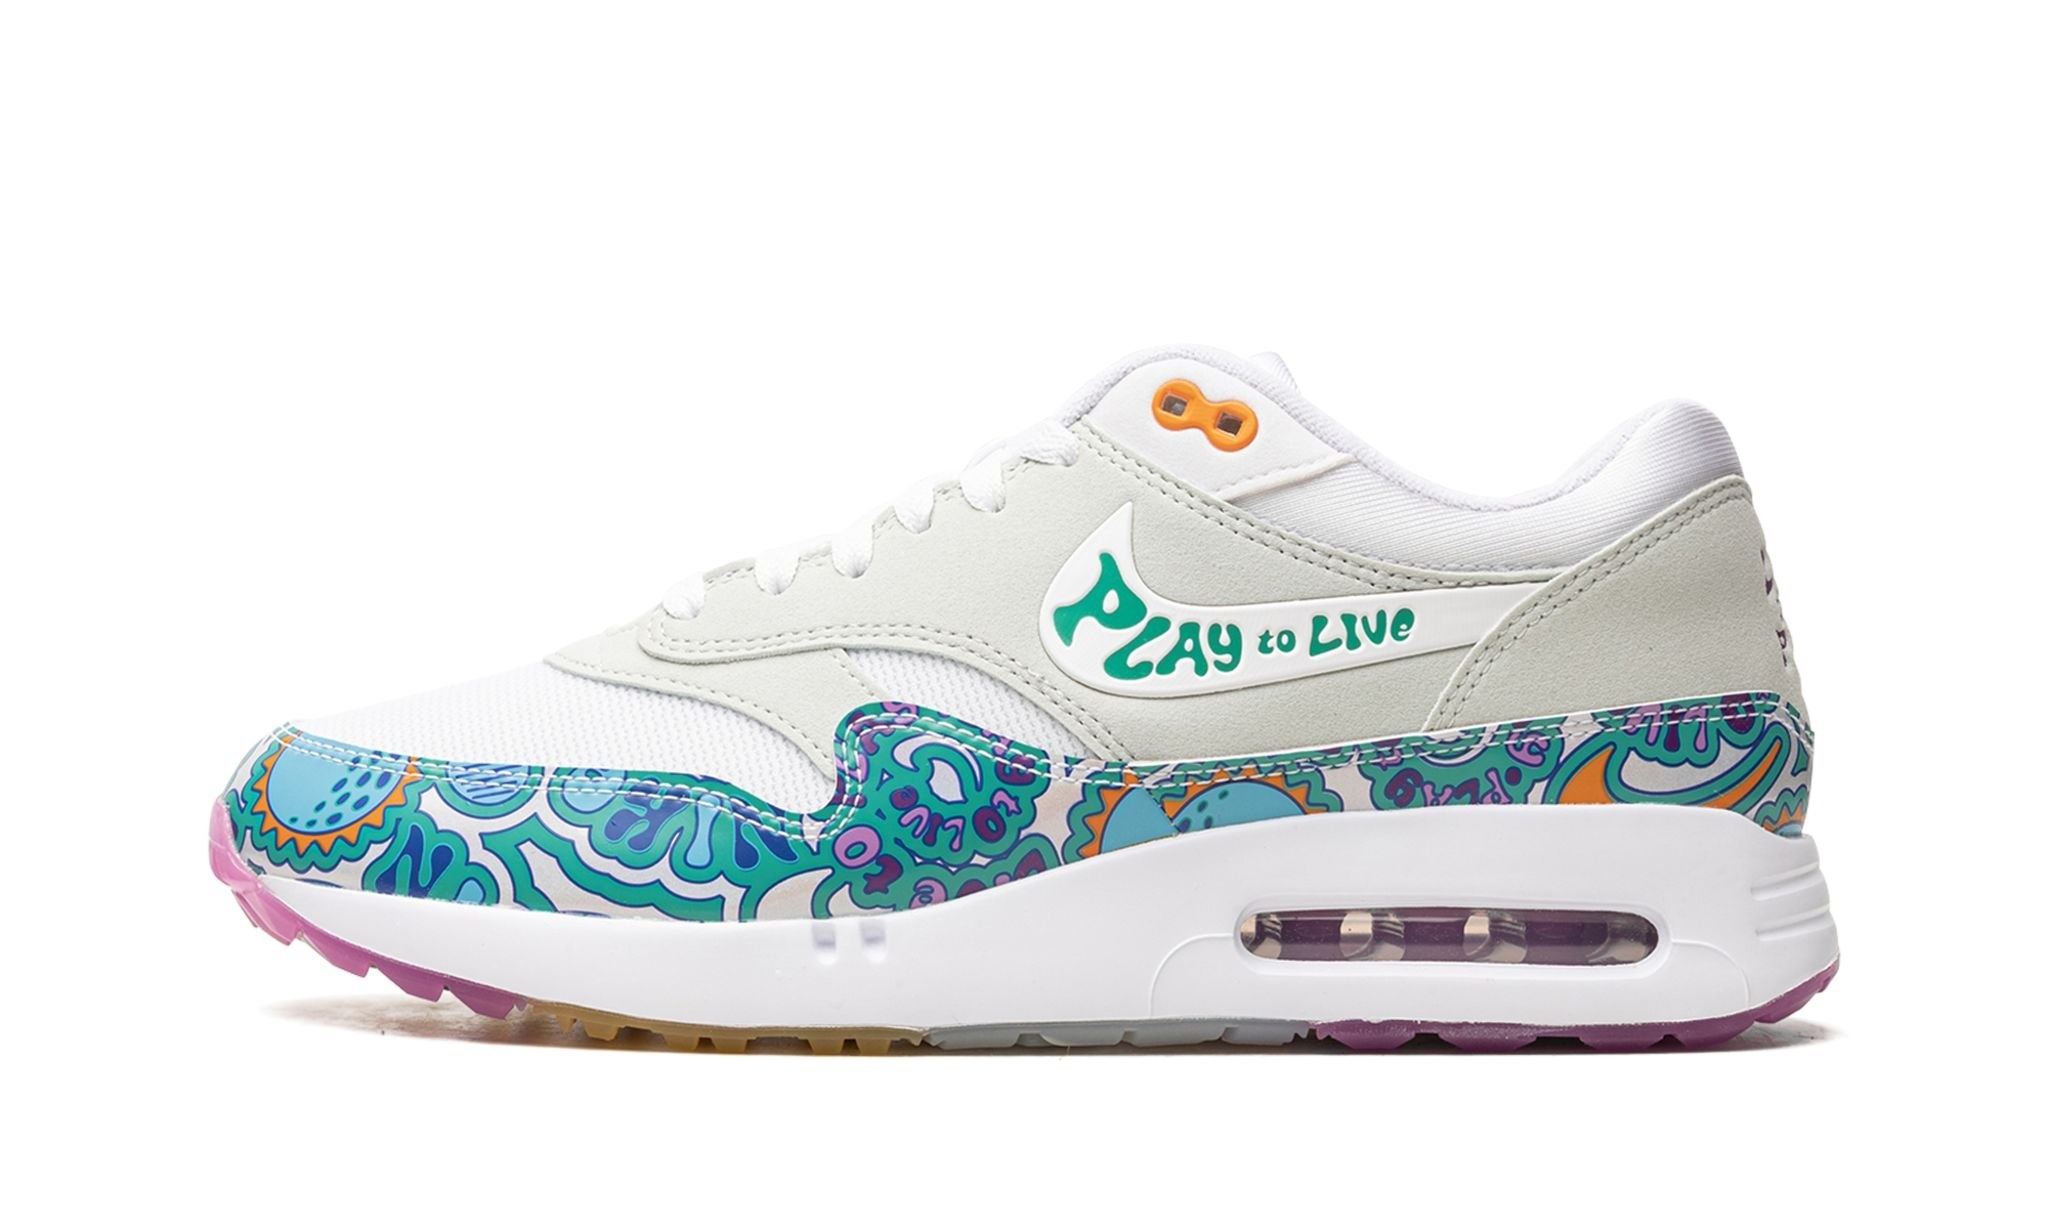 Air Max 1 Golf "Play To Live" - 1